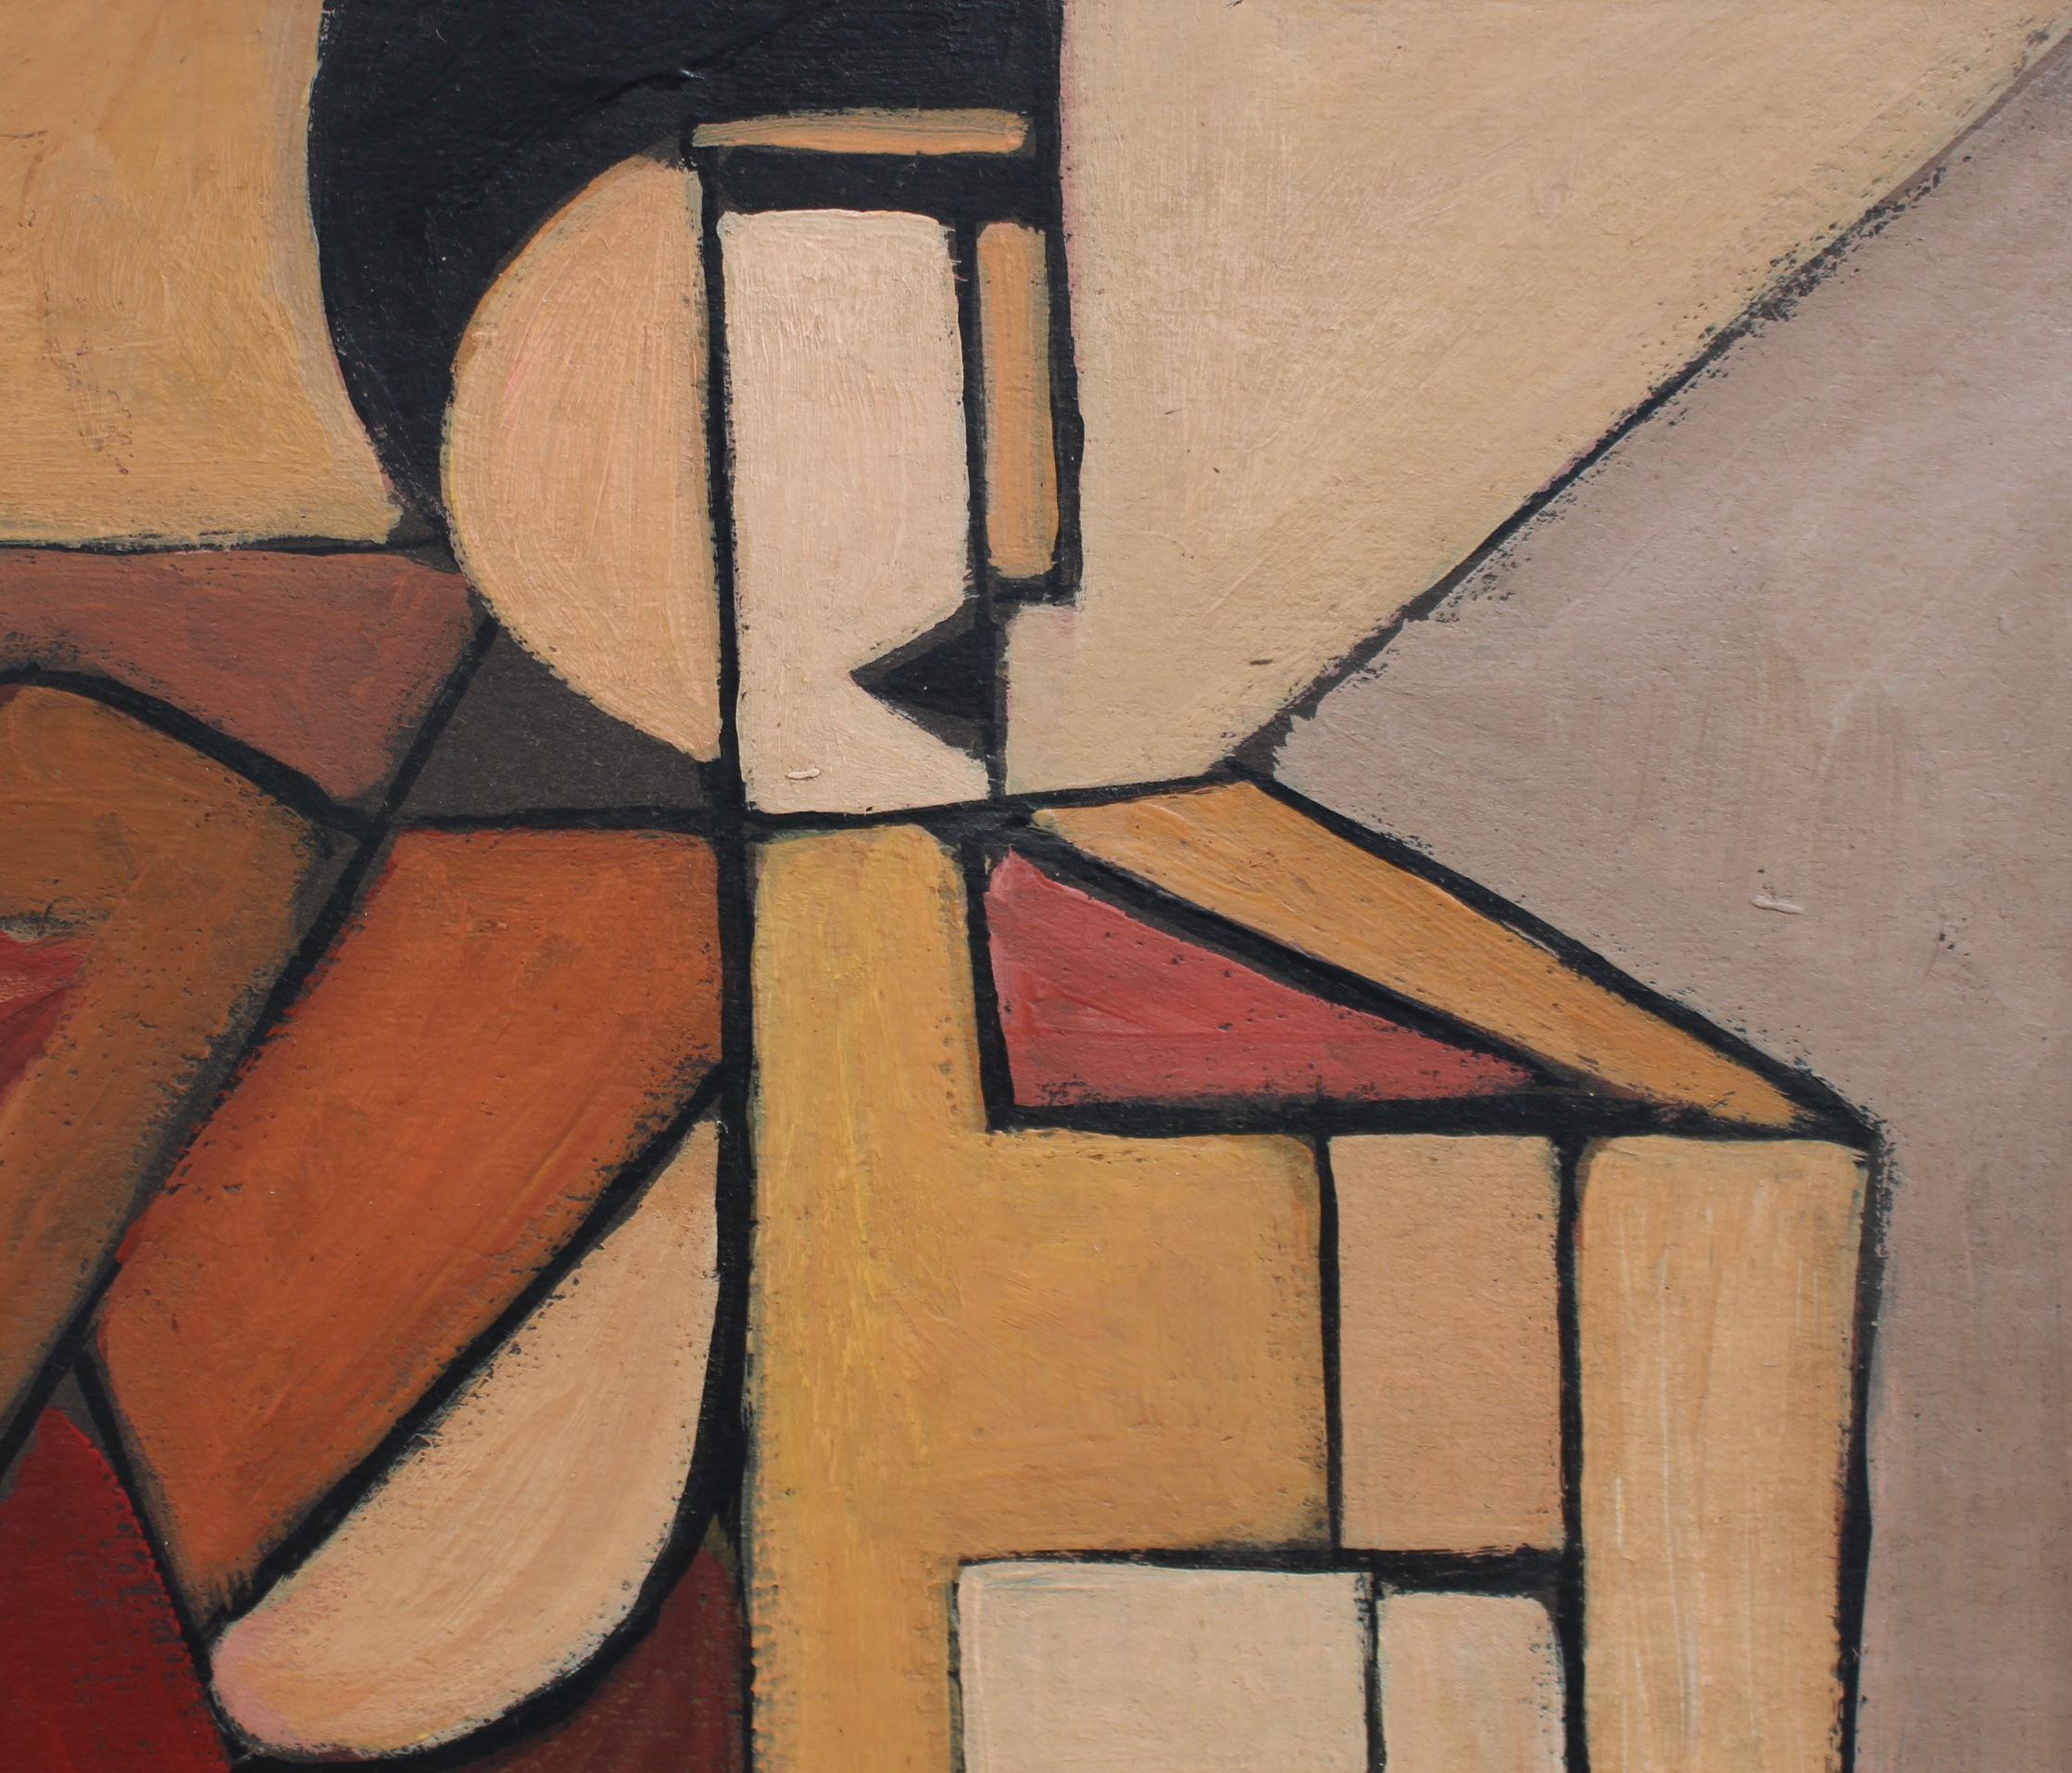 'Portrait of Abstract Man, oil on board, Berlin School by artist with initials A.M. (circa 1960s). A splendid cubist depiction, this is a warm portrait of a male figure in geometric perspective. The earth-tone hues - brown, beige, clay, hazy purple